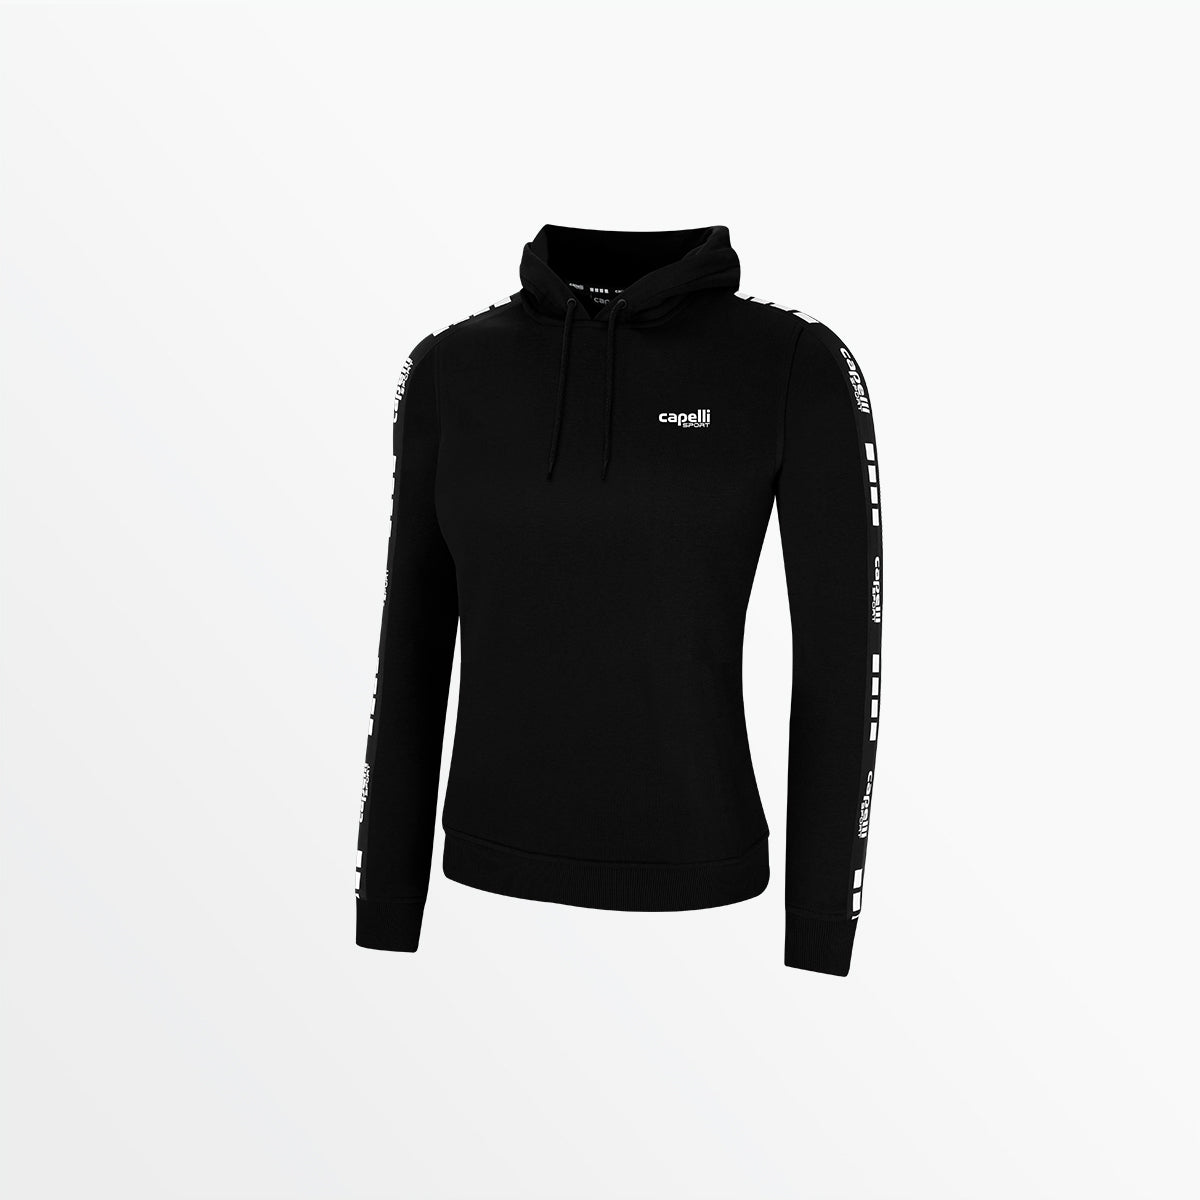 WOMEN'S SIGNATURE CROPPED PULLOVER HOODIE